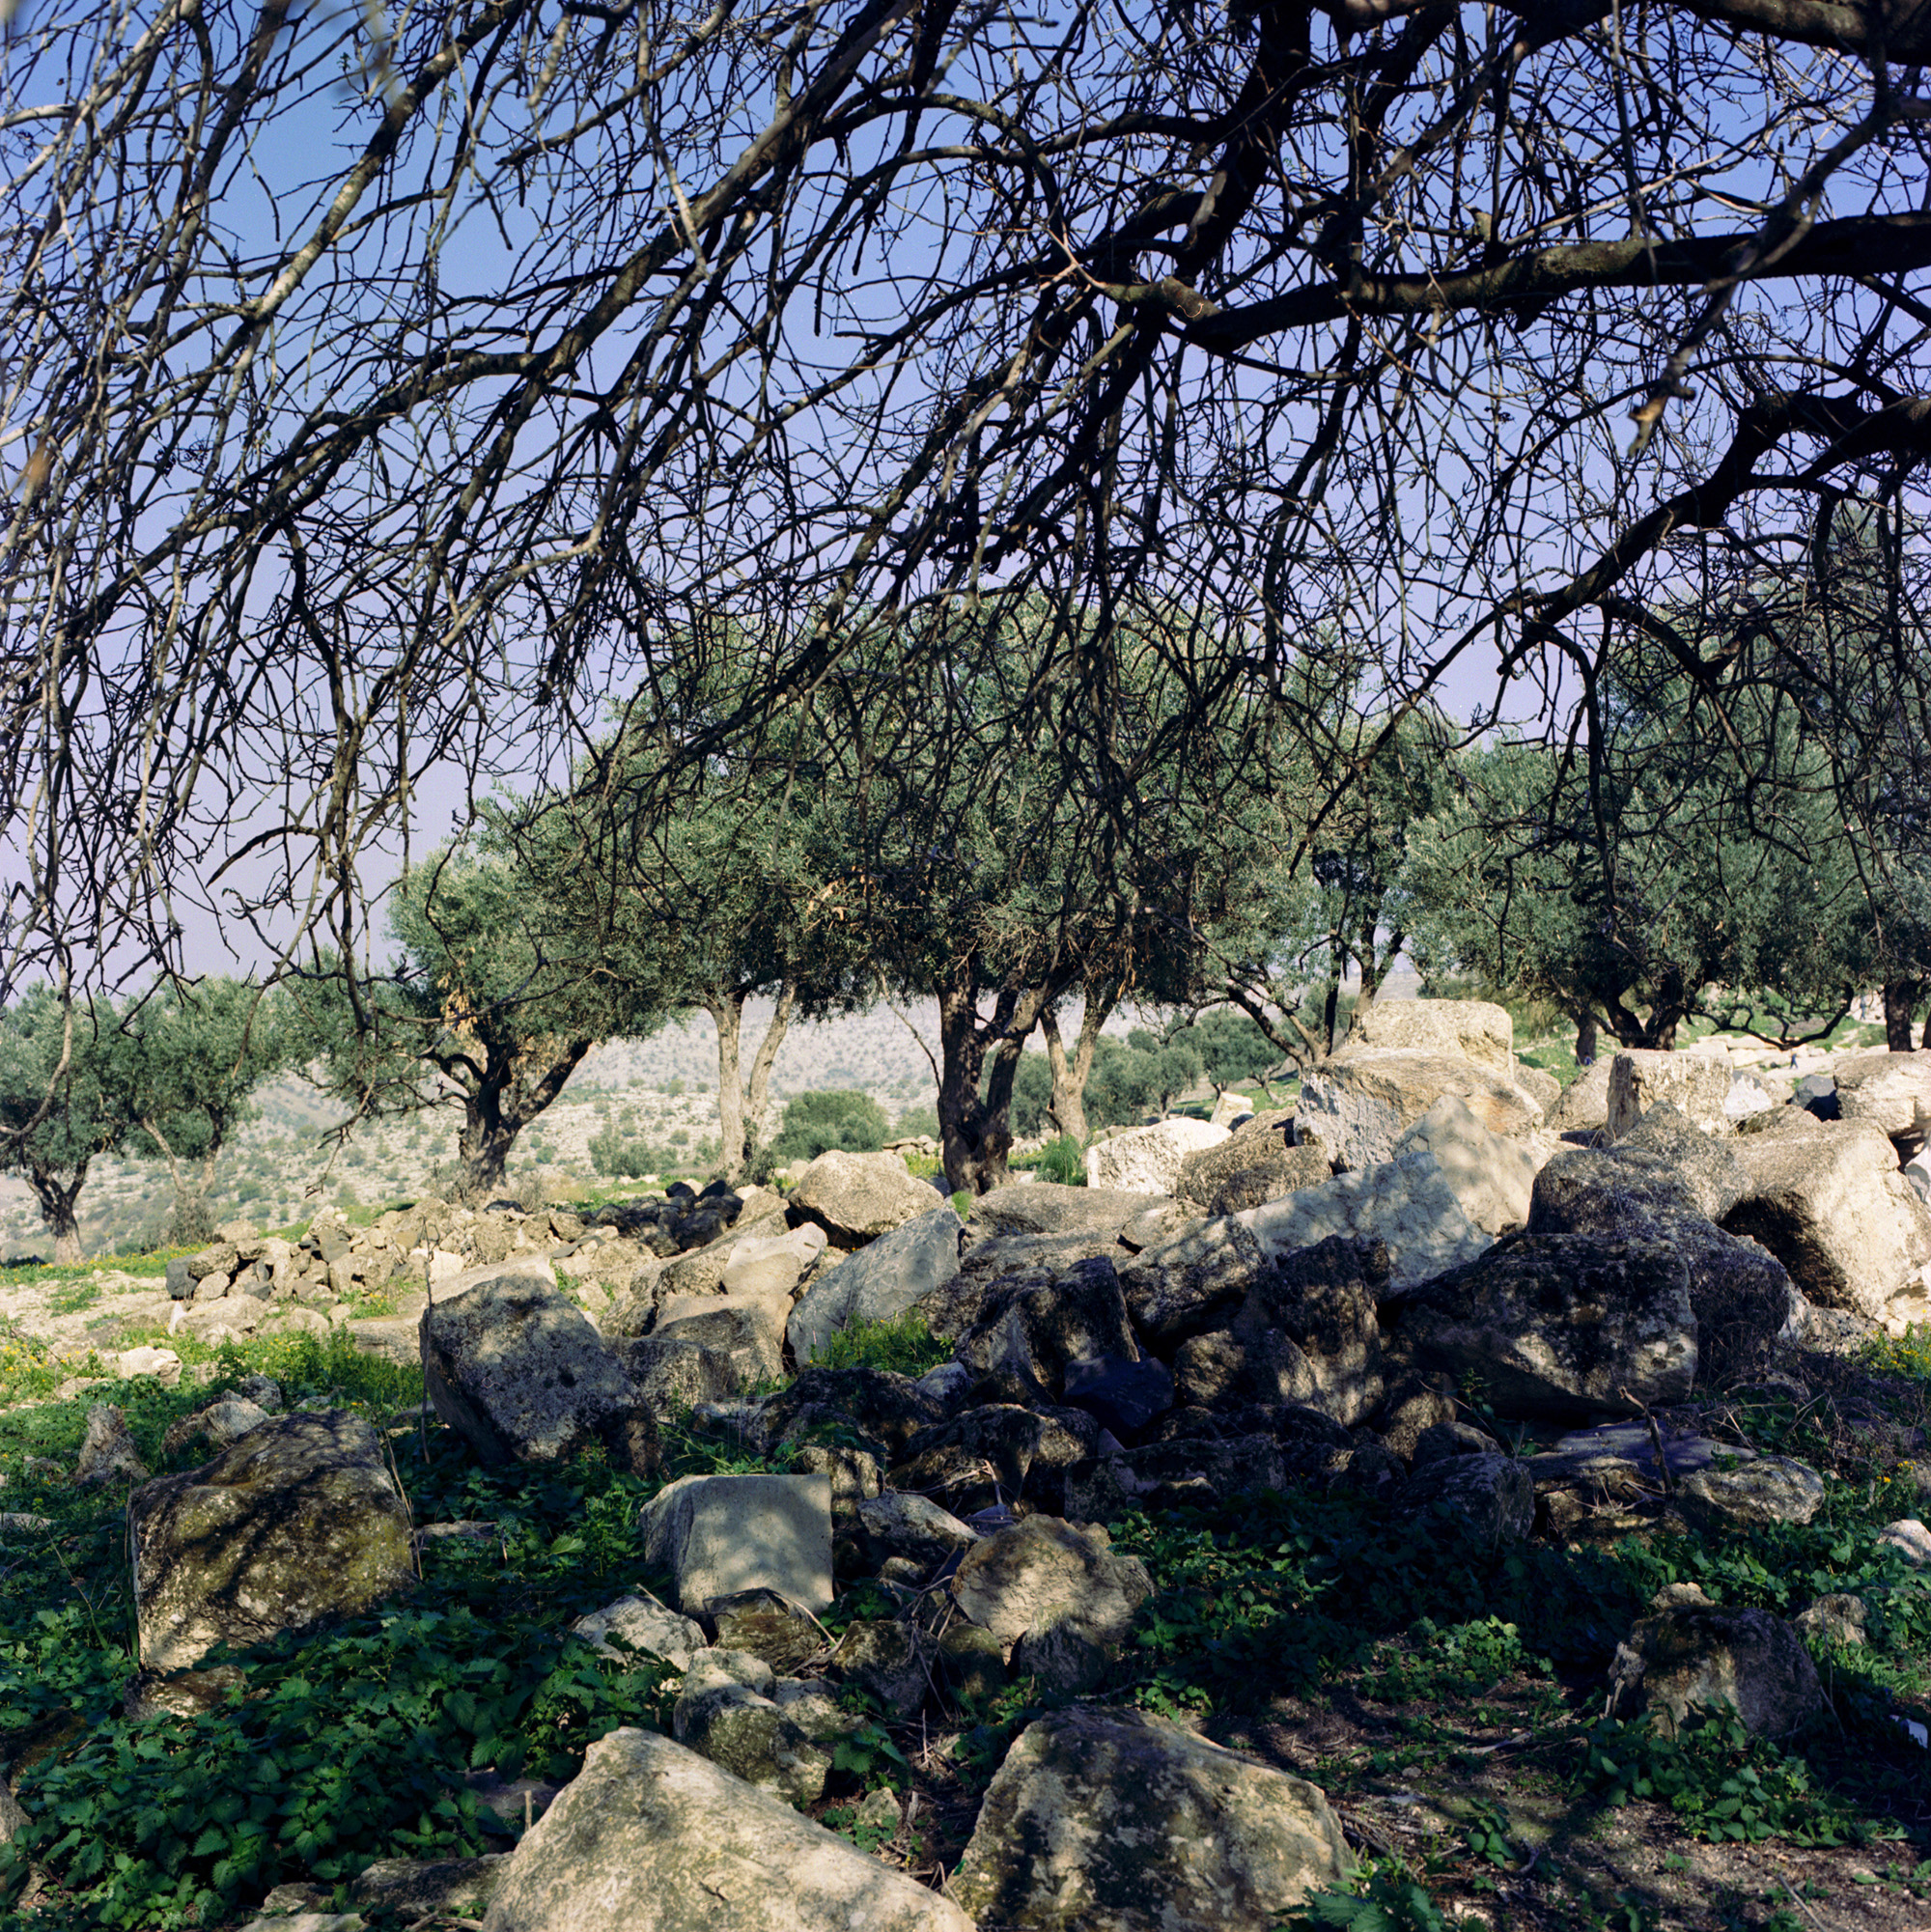 Olive trees and scattered boulders on a hillside